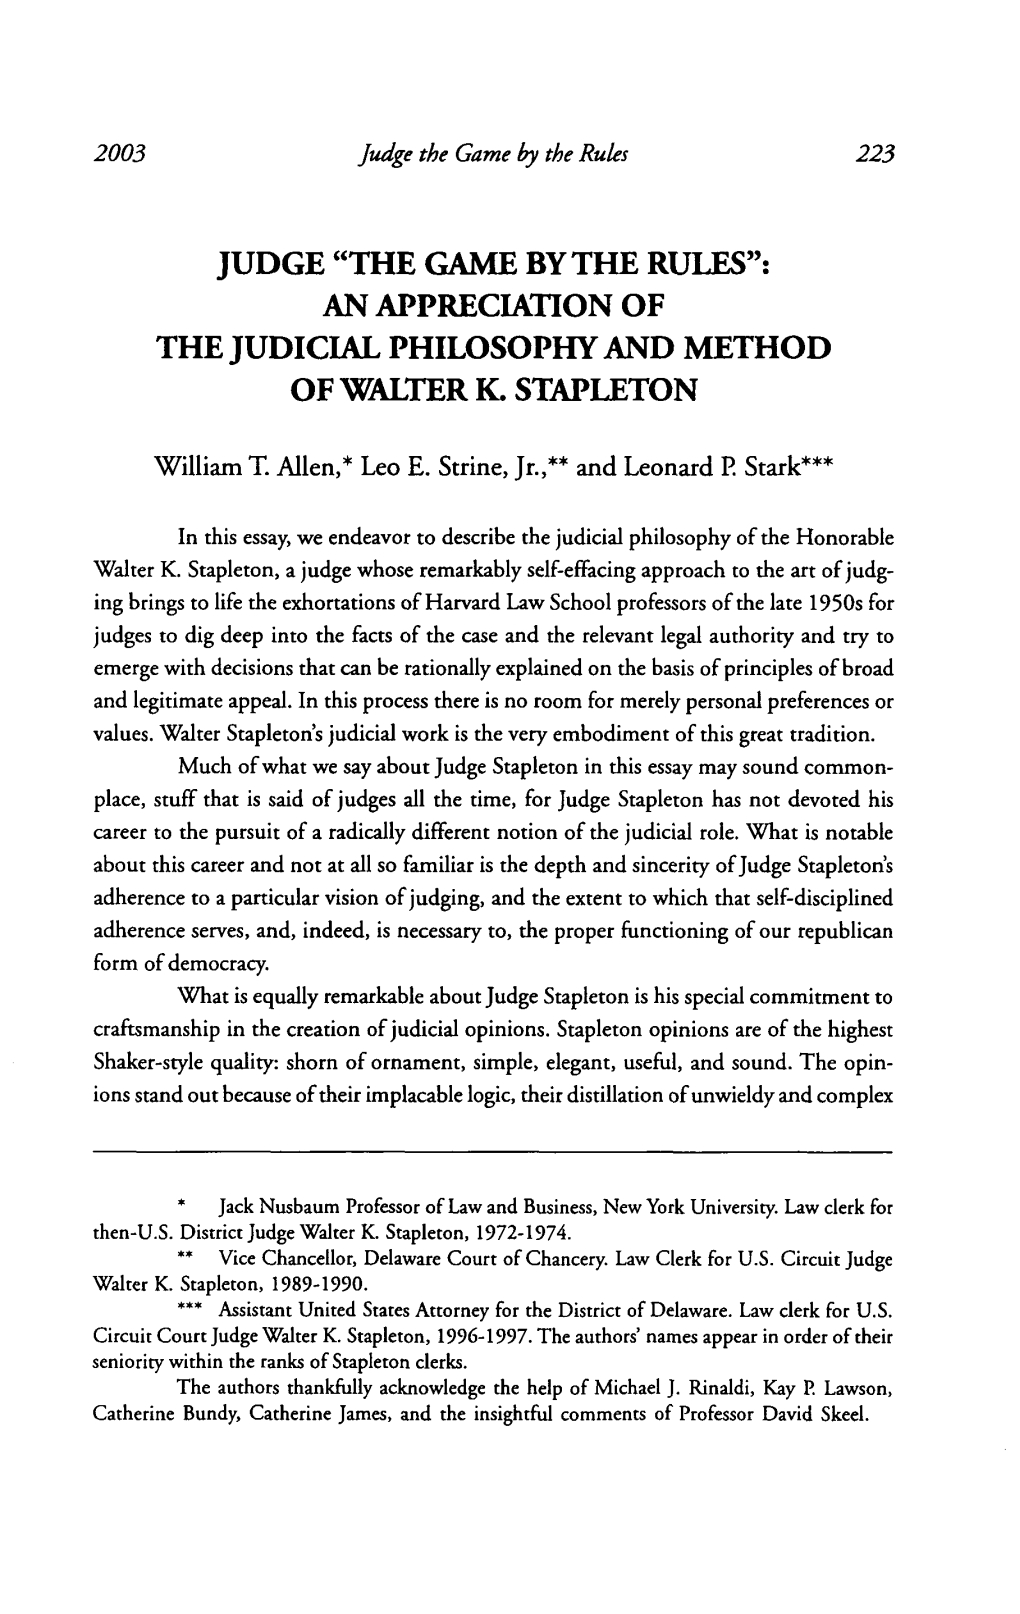 Judge "The Game by the Rules": an Appreciation of the Judicial Philosophy and Method of Walter K